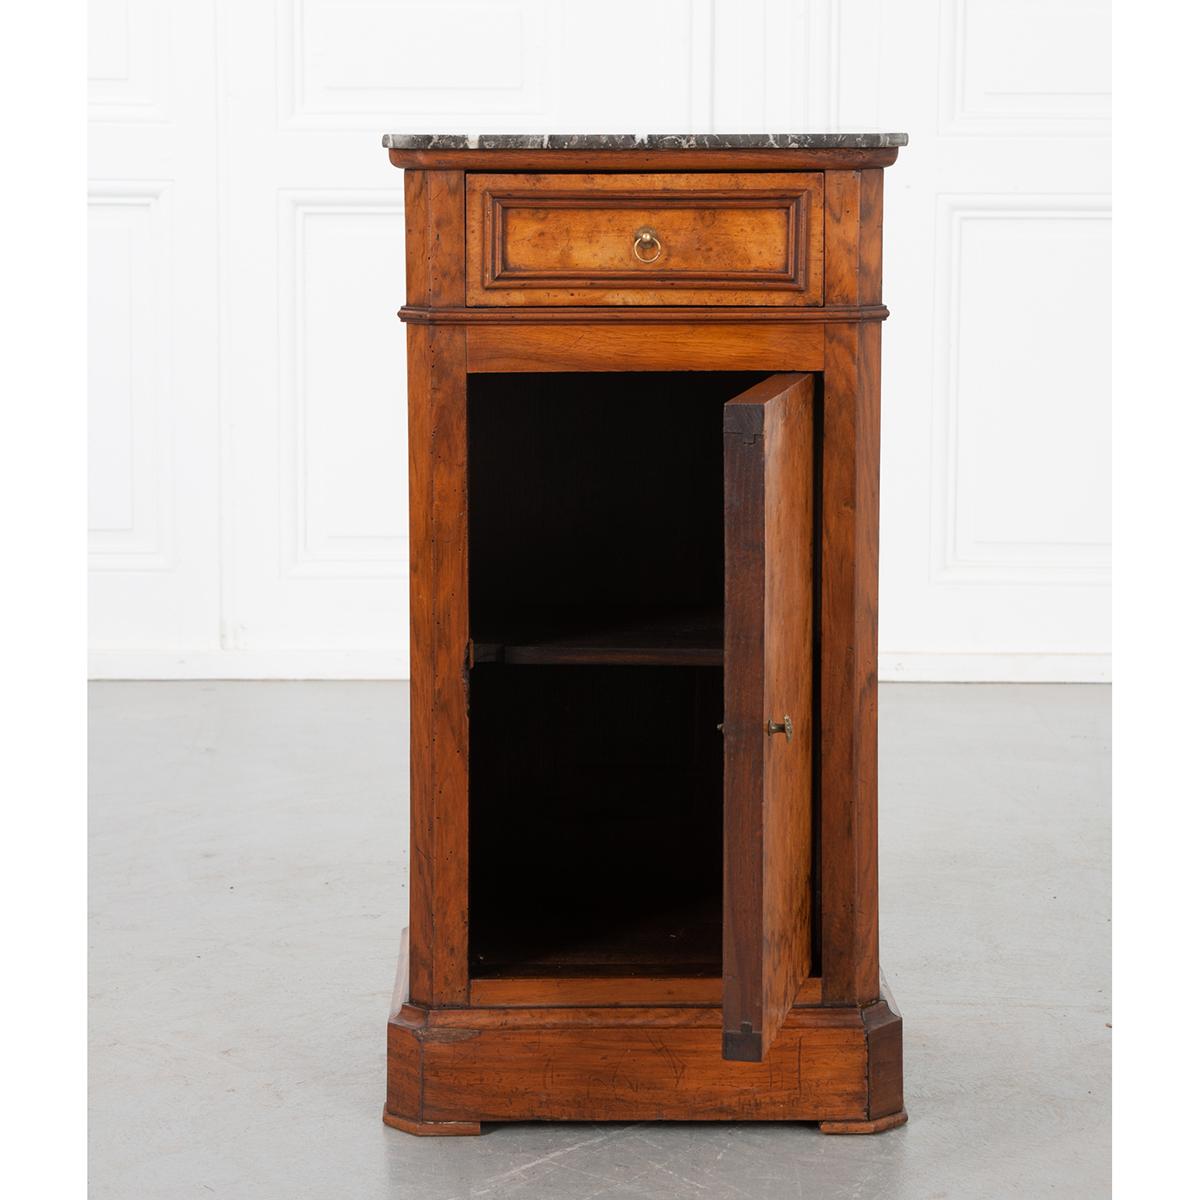 A fantastic French 19th century Louis Philippe bedside made with a burl walnut veneer front. The antique has a Saint-Anne marble top that is set over a panel drawer with a loop brass pull and the door below with an oval brass pull. All sit on a